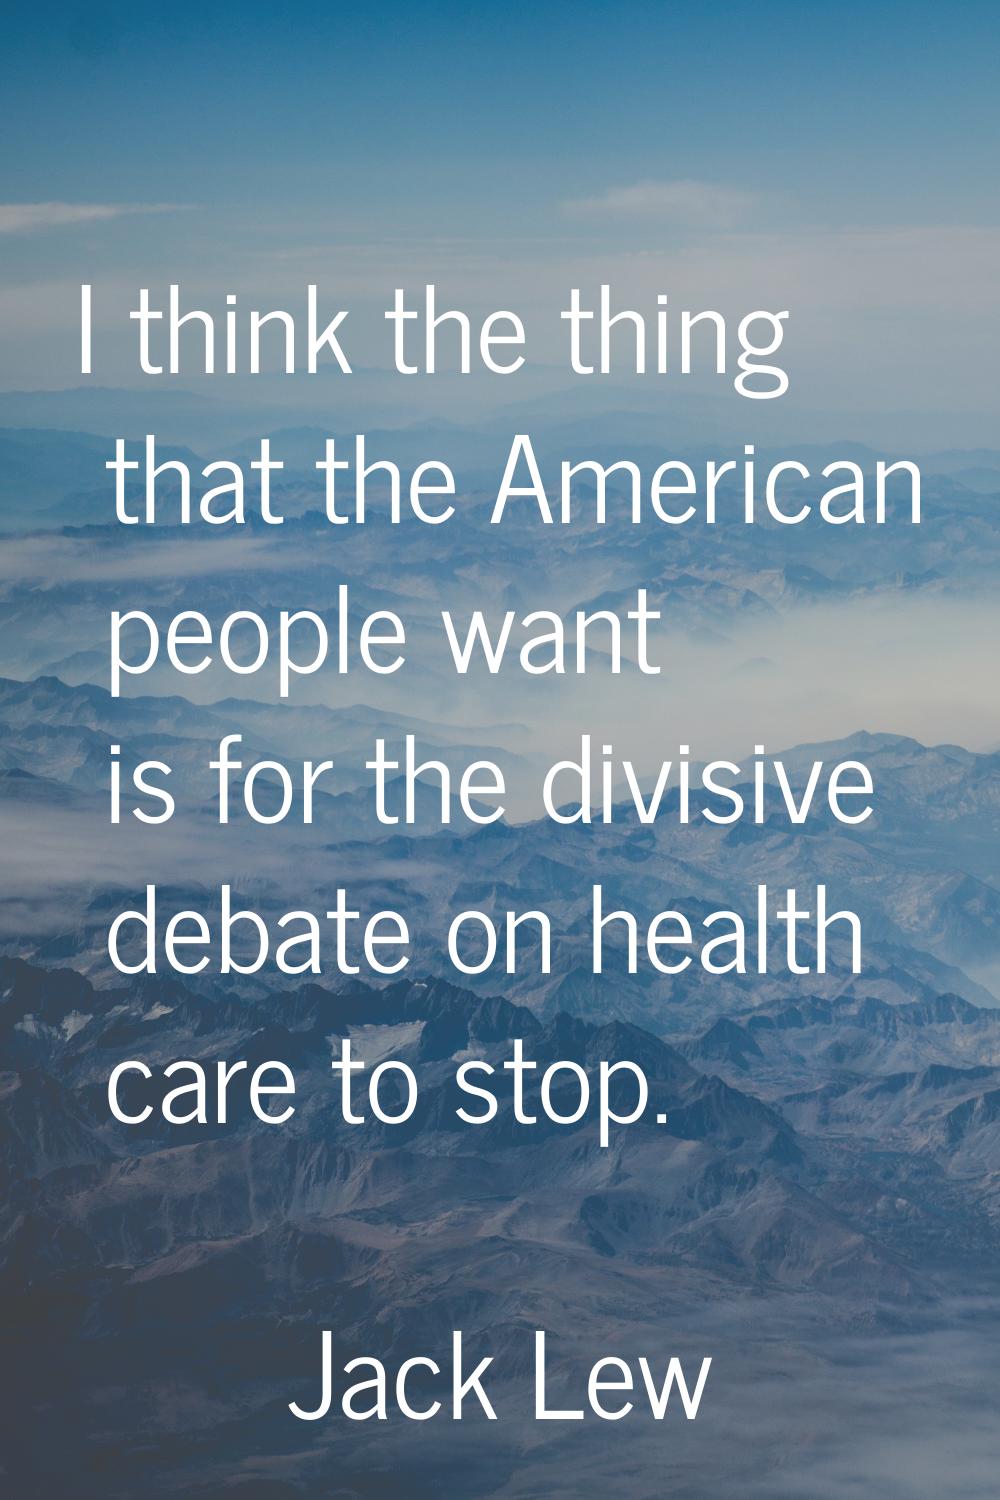 I think the thing that the American people want is for the divisive debate on health care to stop.